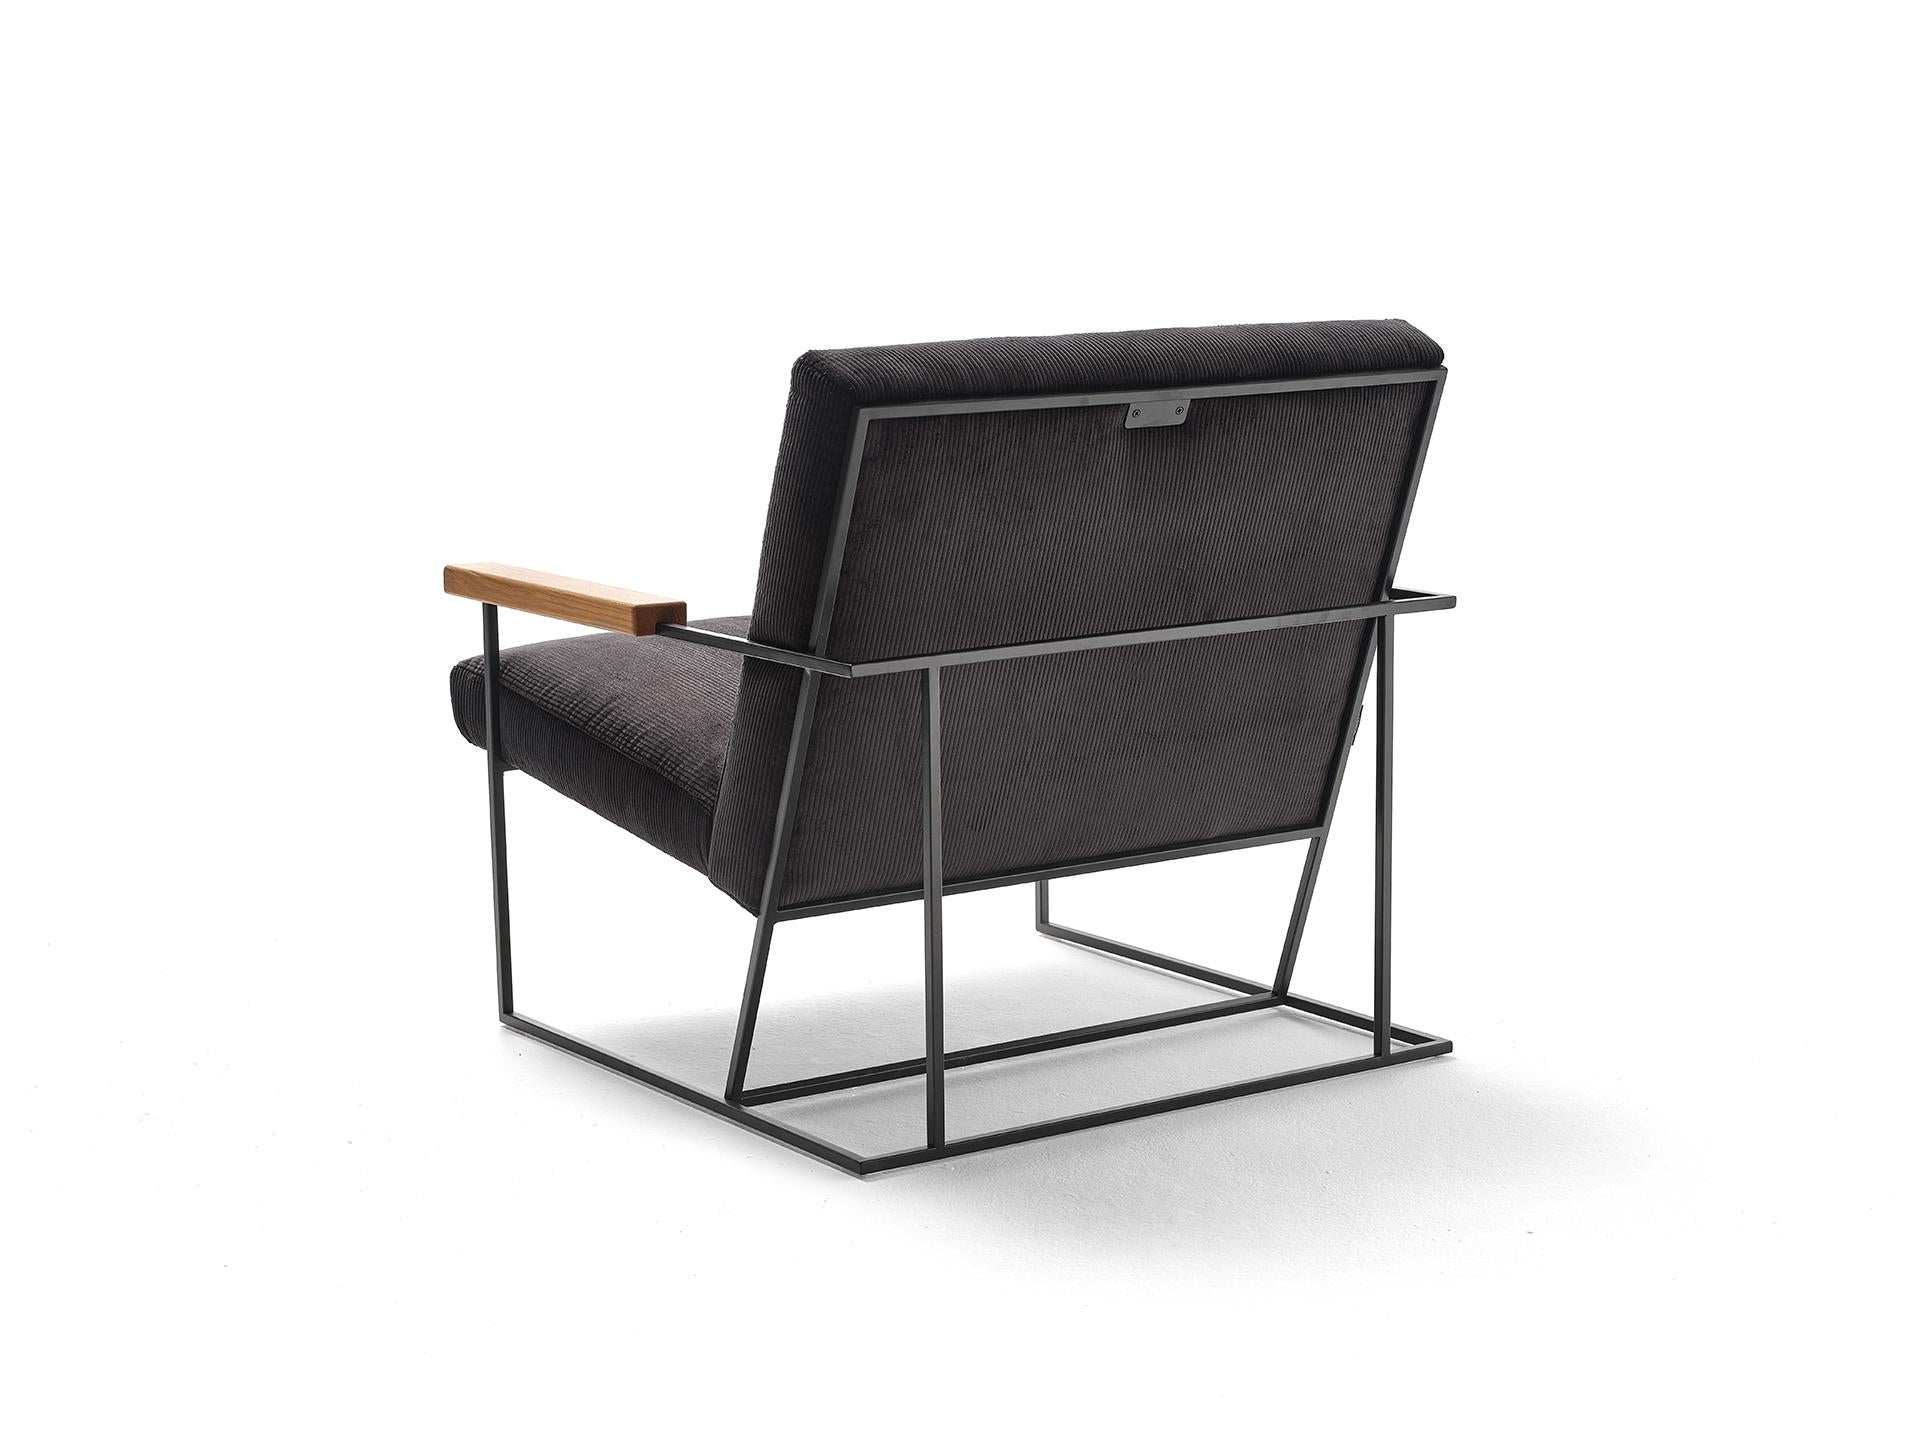 The distinctive linear geometry and the visual lightness of the Gotham armchair come from its metal frame, a clean aerial structure that holds the seat and backrest cushions. These in contrast are generous and voluminous thus creating a visual